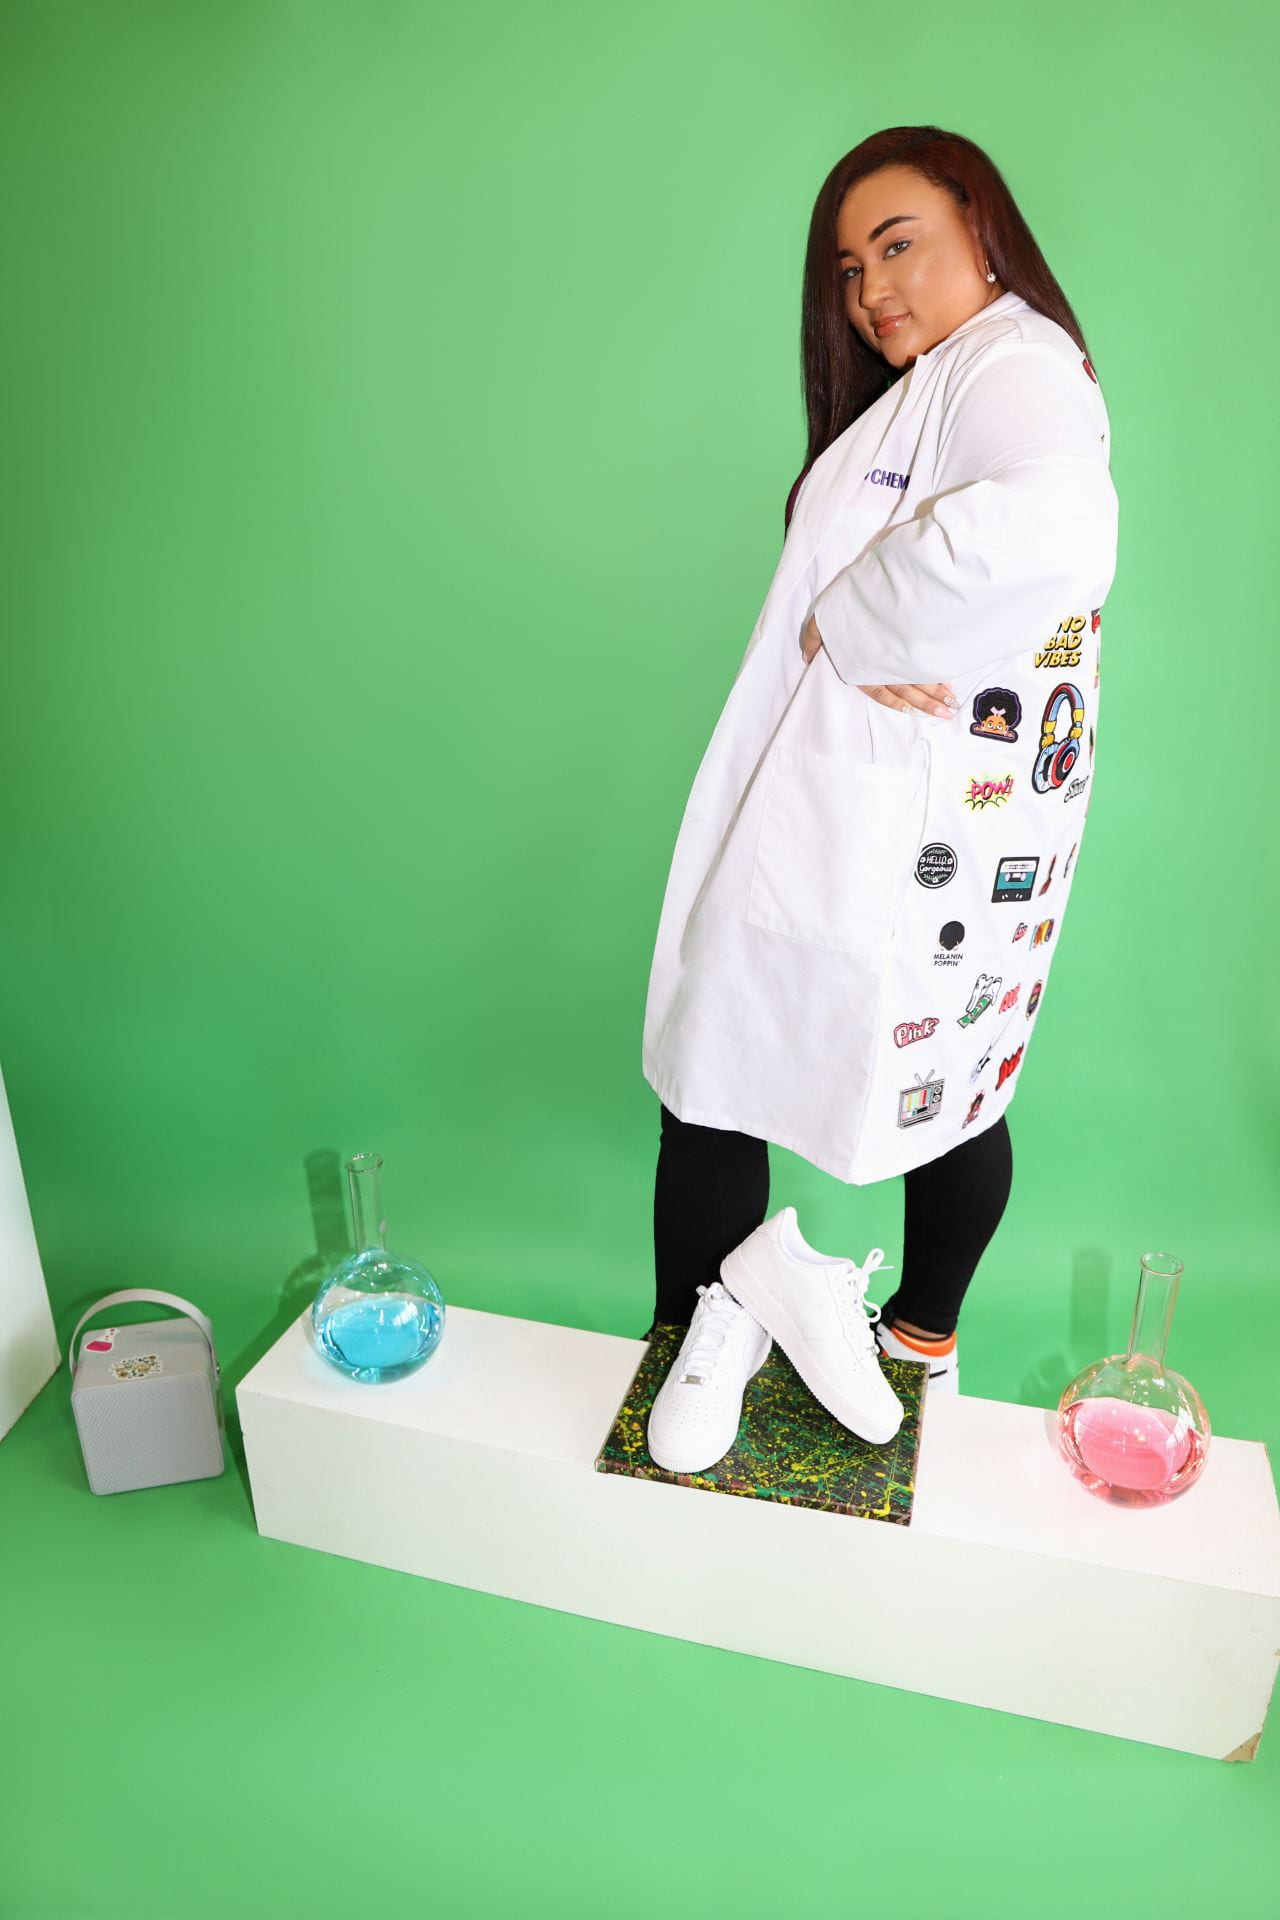 [Jakyra Simpson Posing with Sneakers and Chemistry Props.]